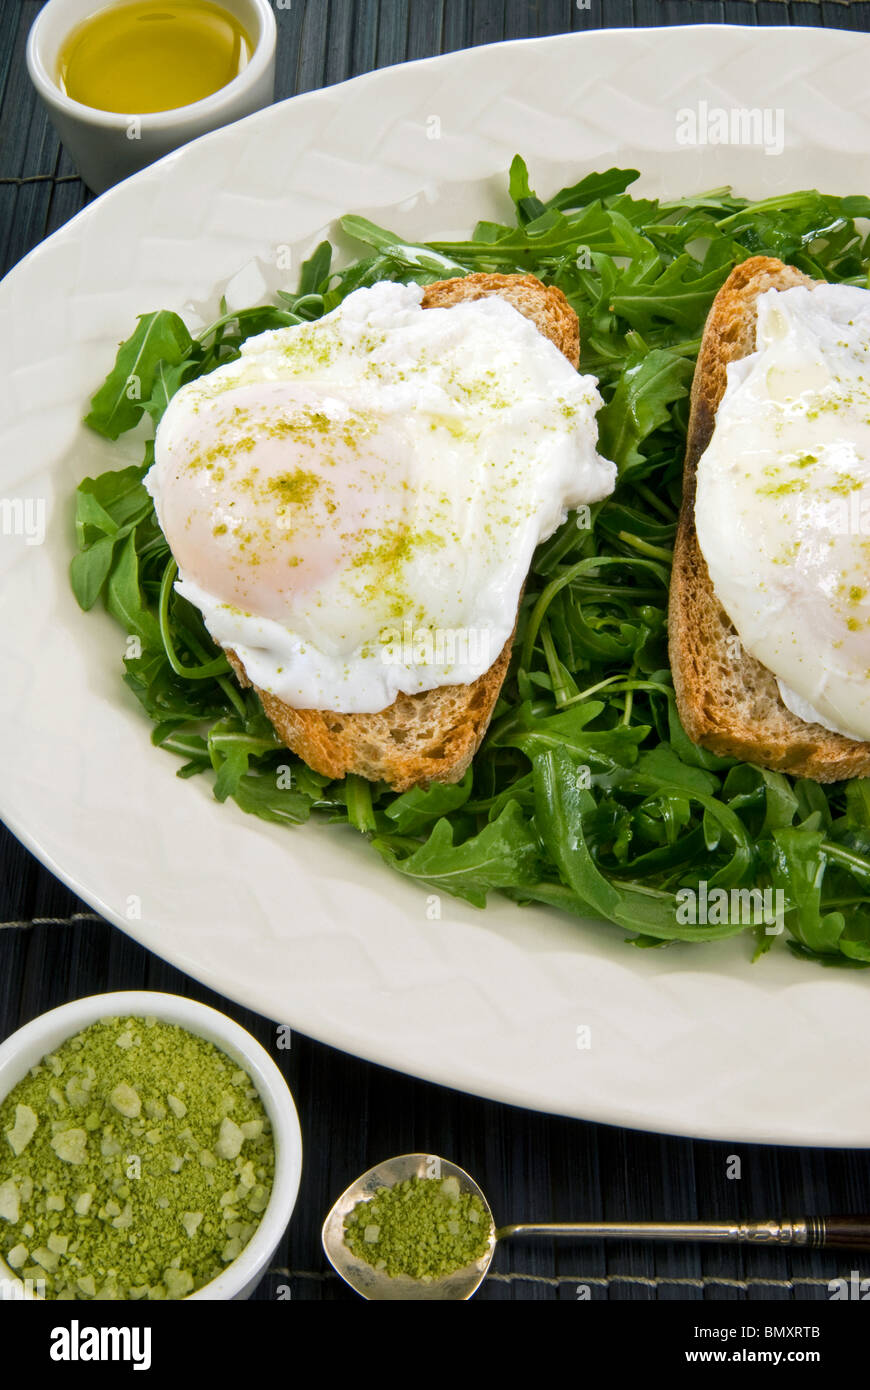 Poached eggs and Matcha japanise tea salt in a arugola (rocket, eruca sativa, rucola) bed Stock Photo